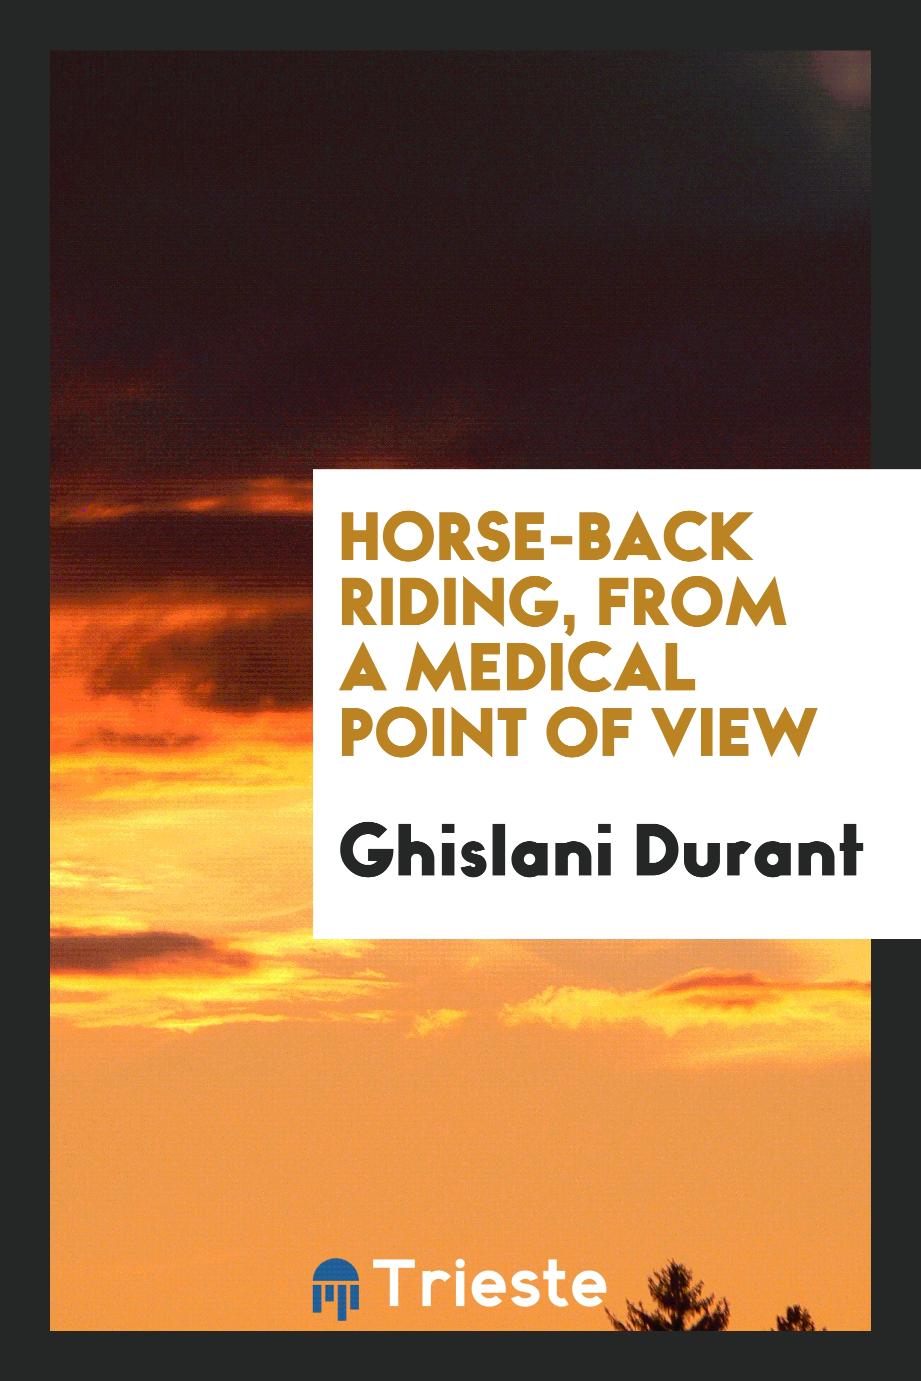 Horse-Back Riding, from a Medical Point of View